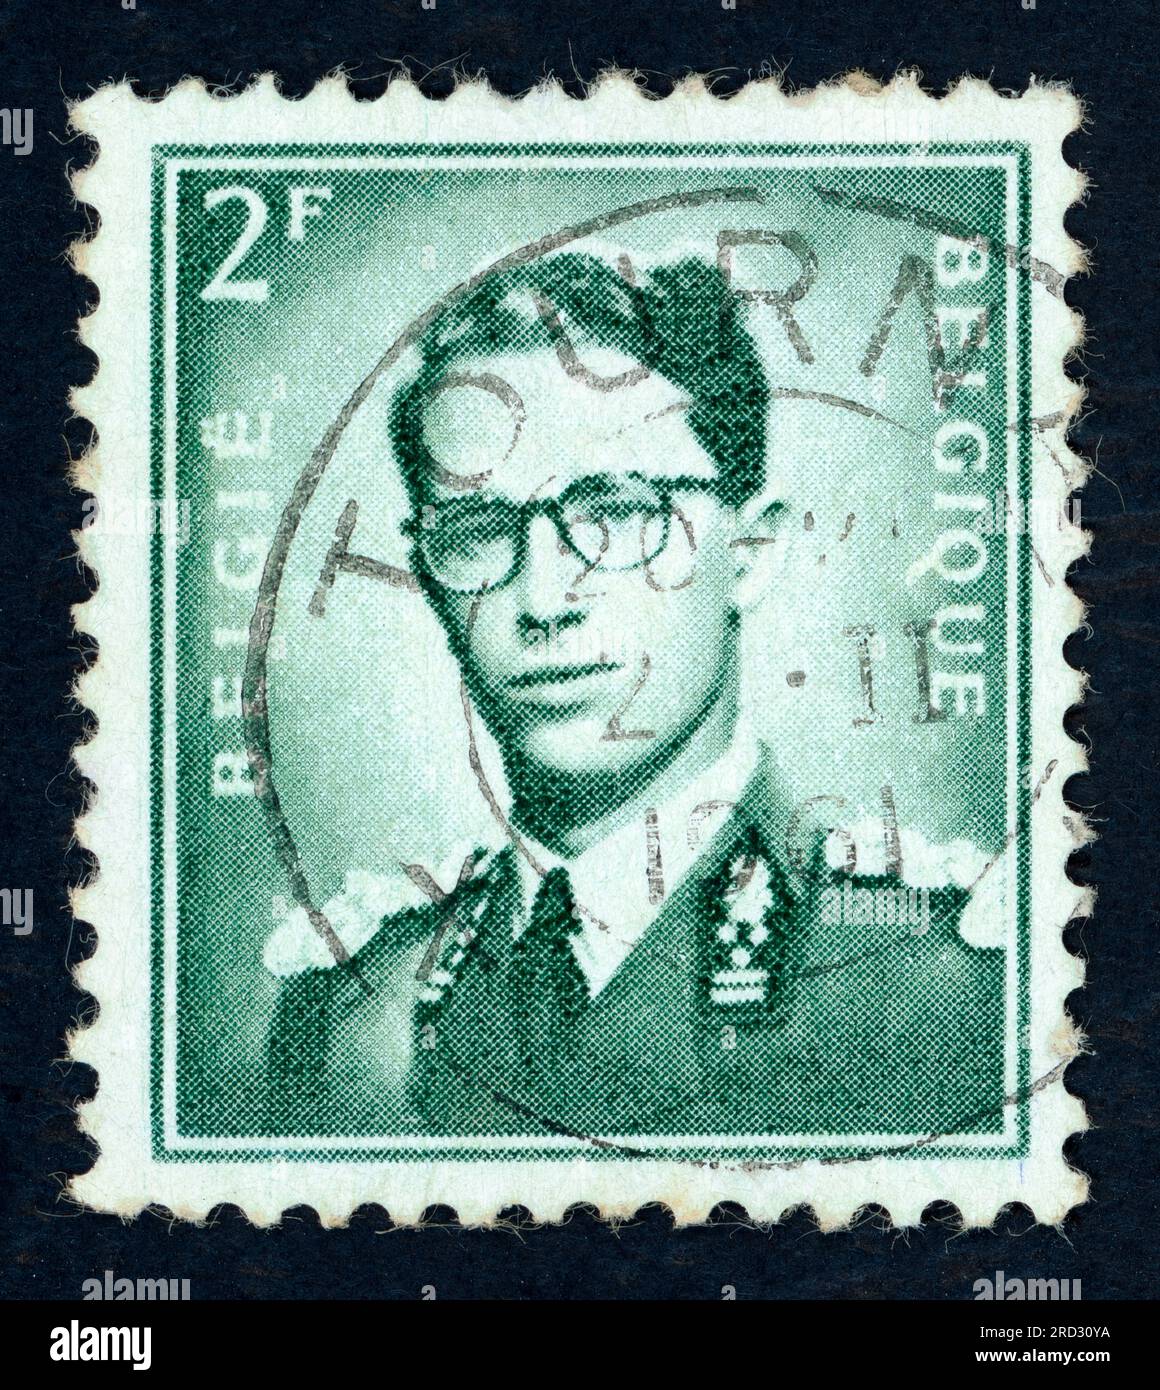 Baudouin (1930 – 1993), the King of the Belgians from 1951 until his death in 1993. Stamp issued in Belgium in 1950s or 1960s. Stock Photo